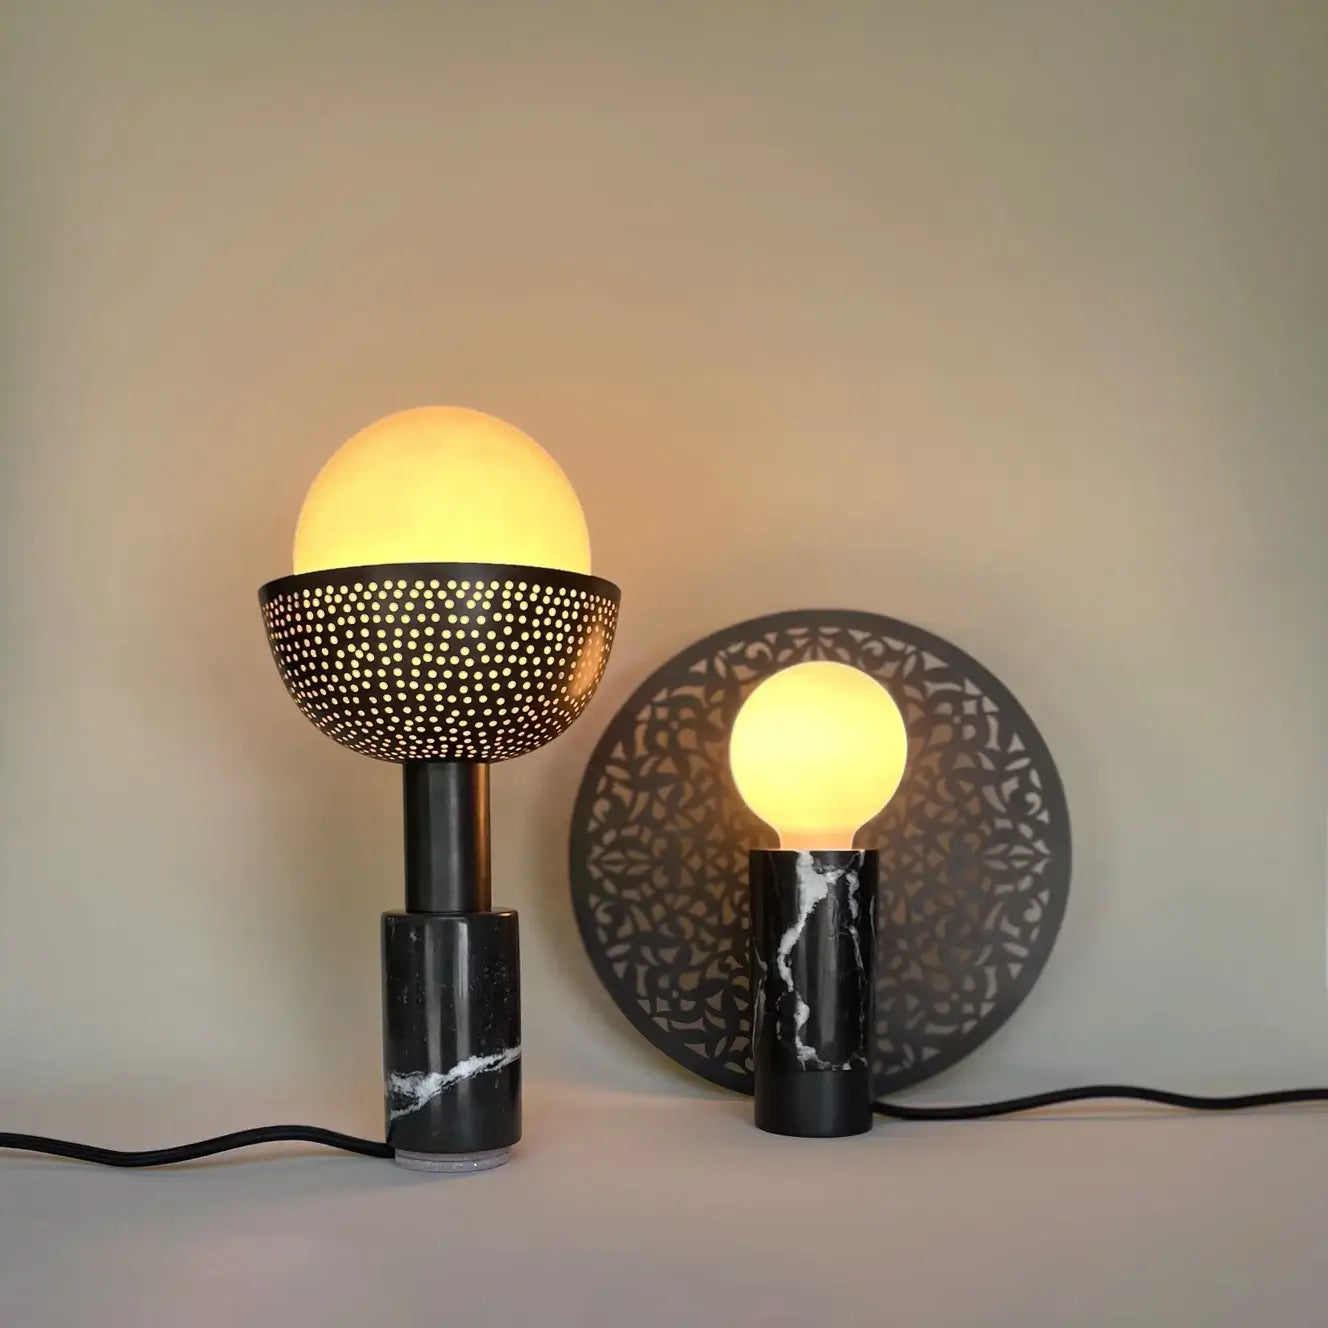 Dounia home Table lamp in black  made of Metal, Model: Riad disc, Close Up View